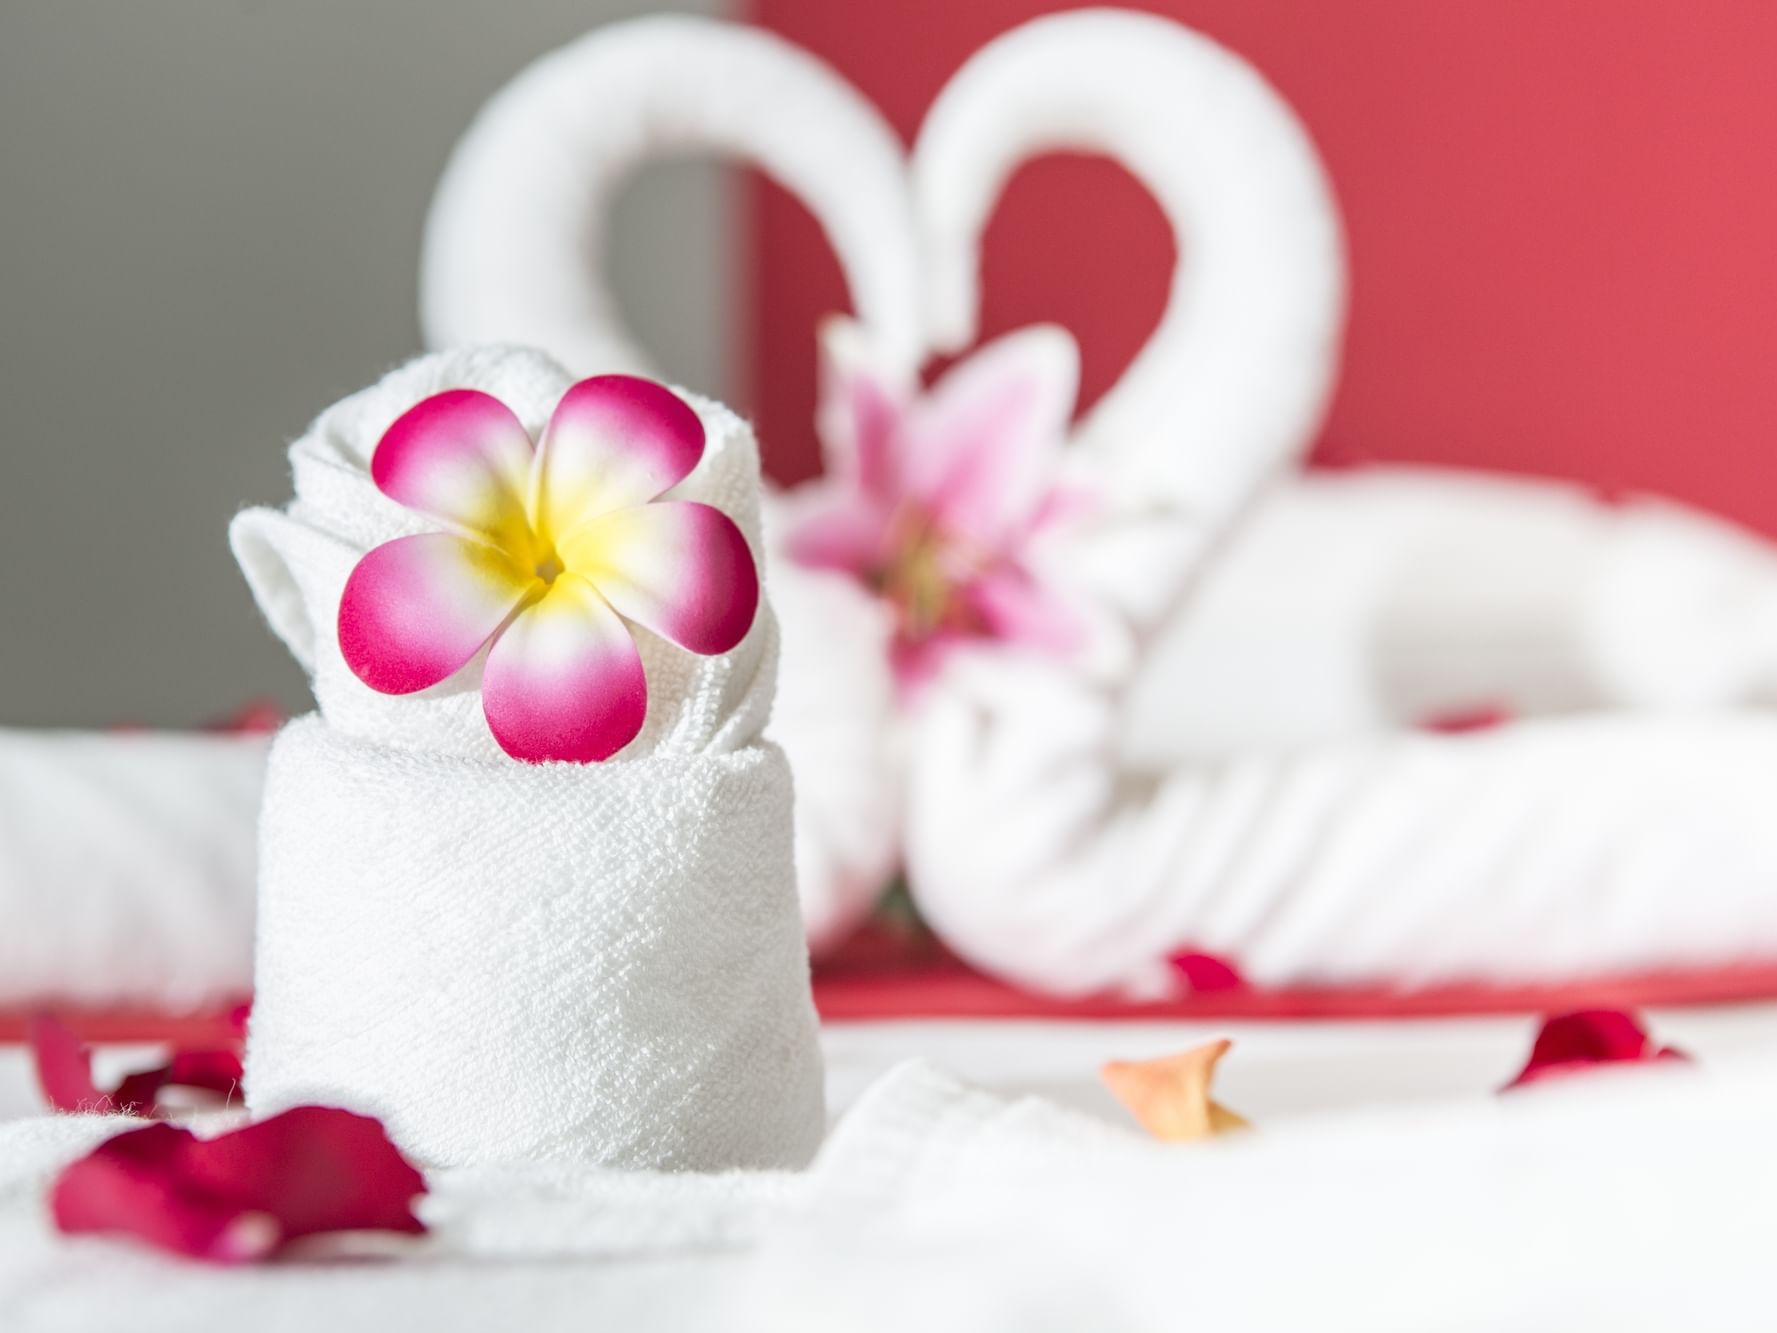 Rolled towel with a flower